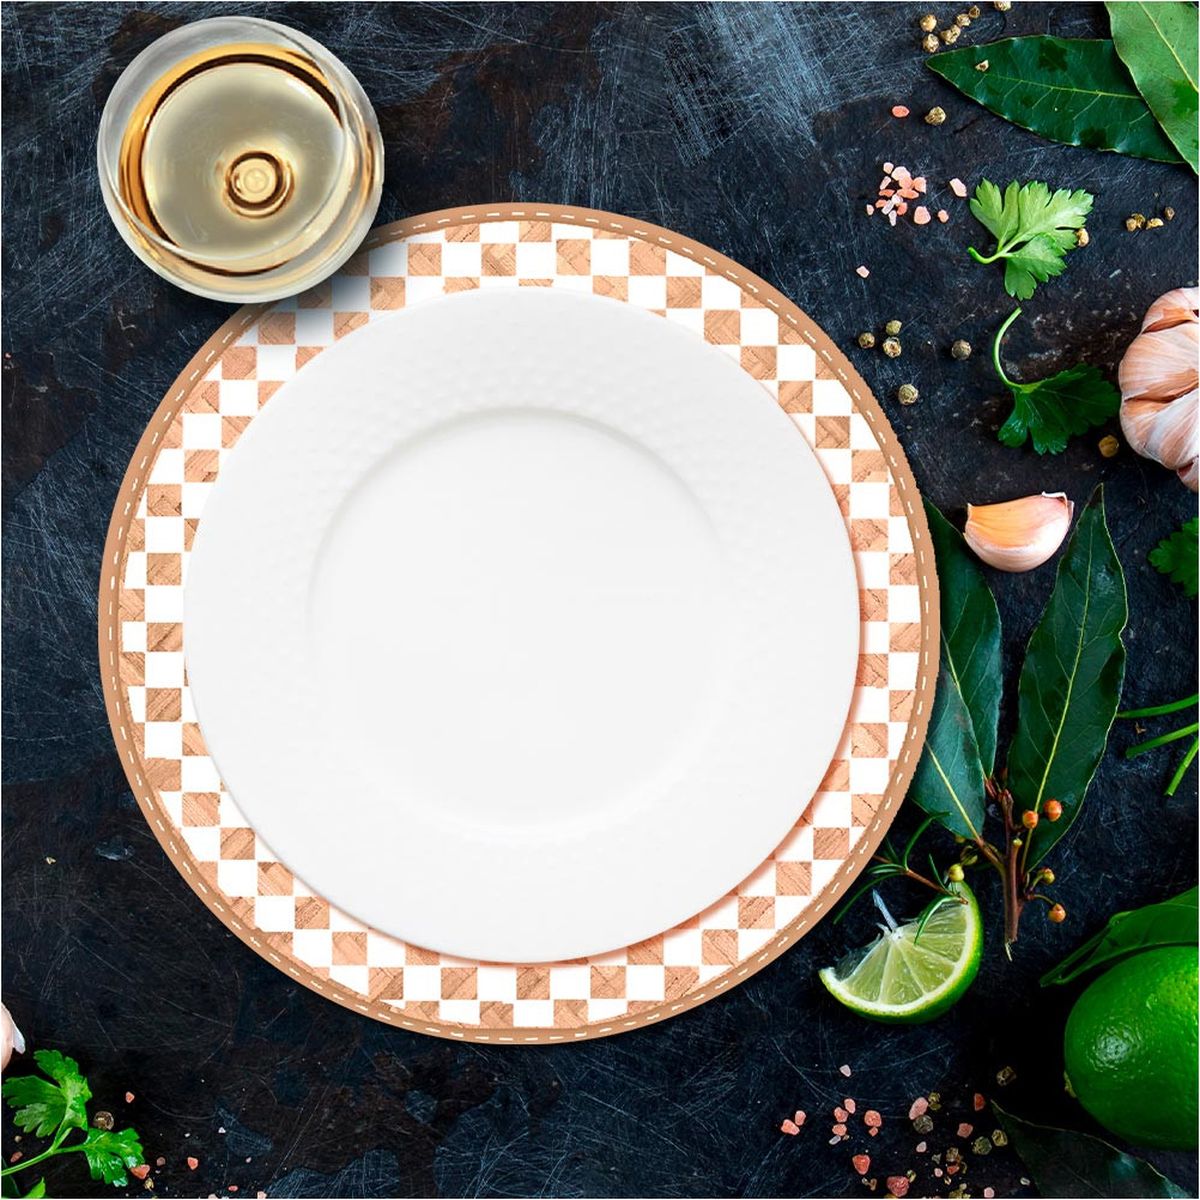 Round beige and white woven bamboo leaf placemat - 38 cm